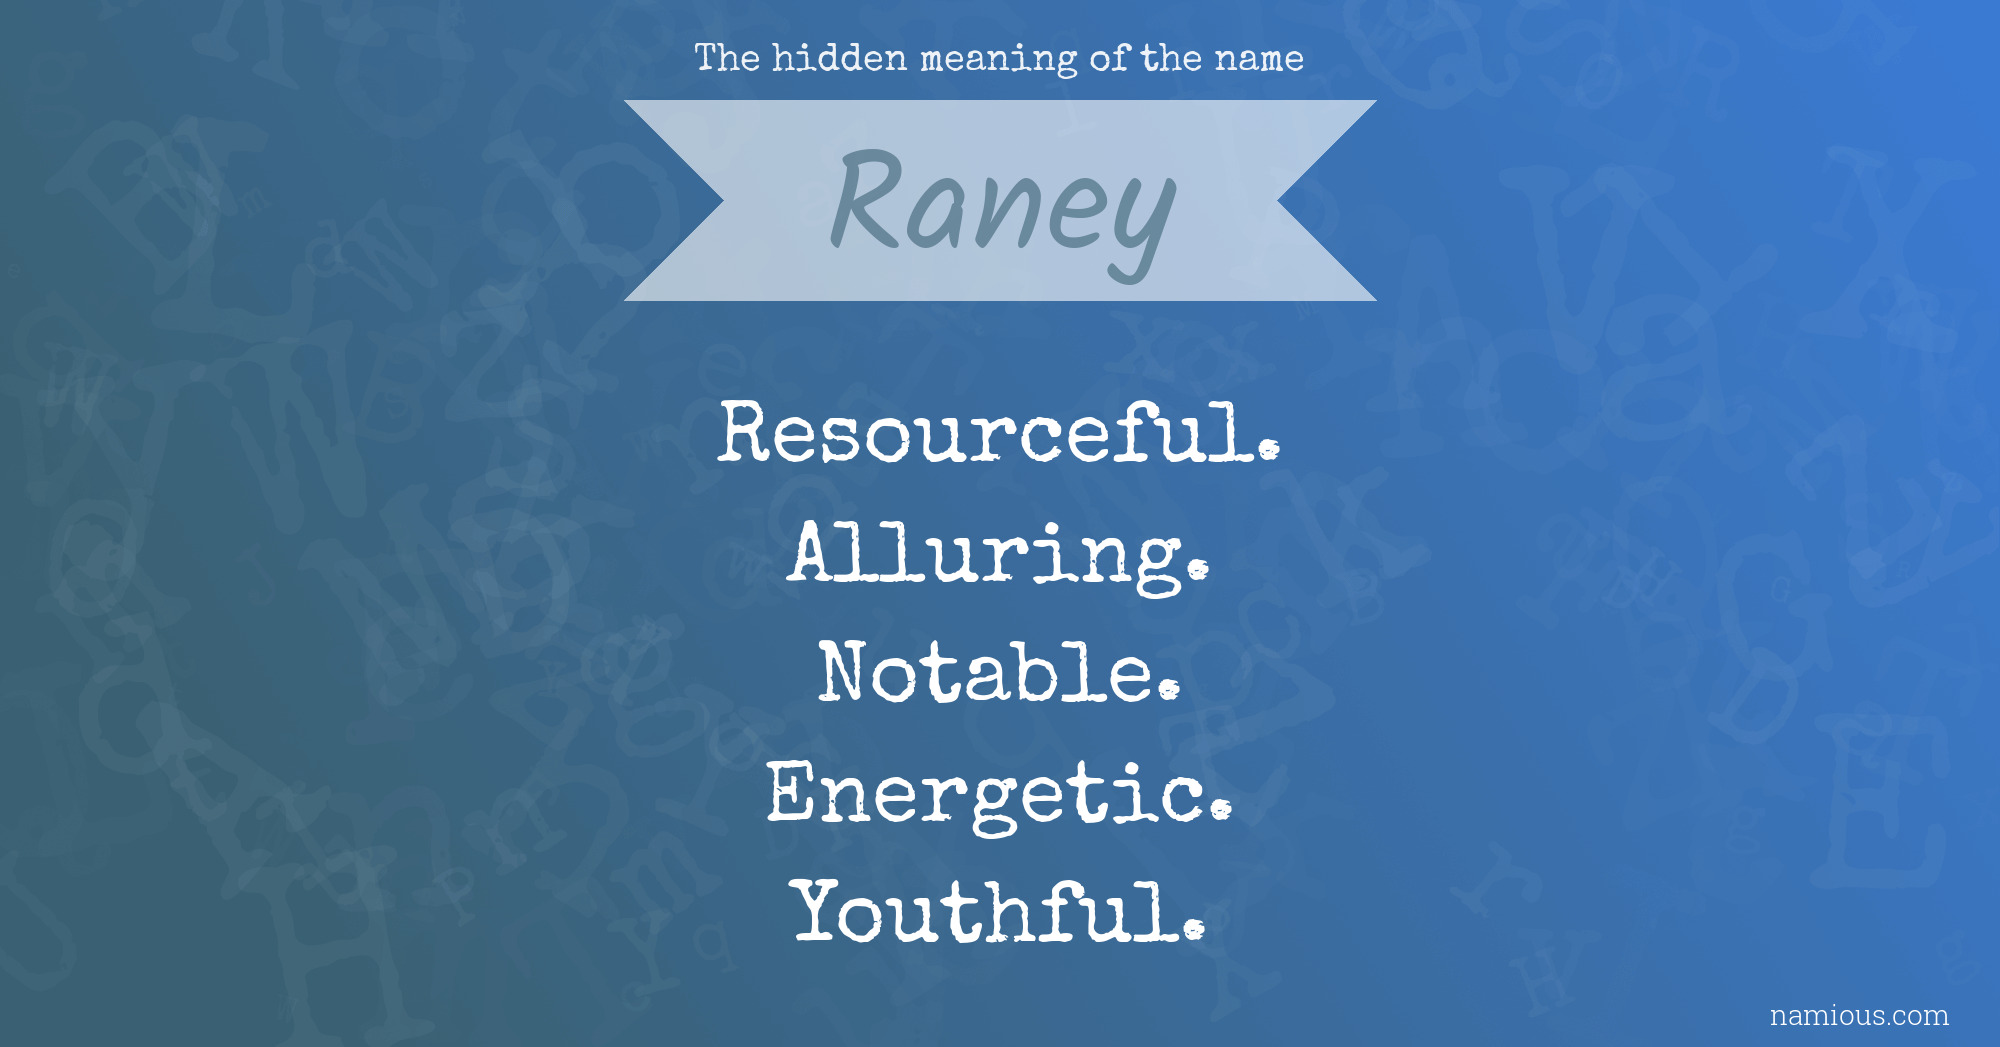 The hidden meaning of the name Raney